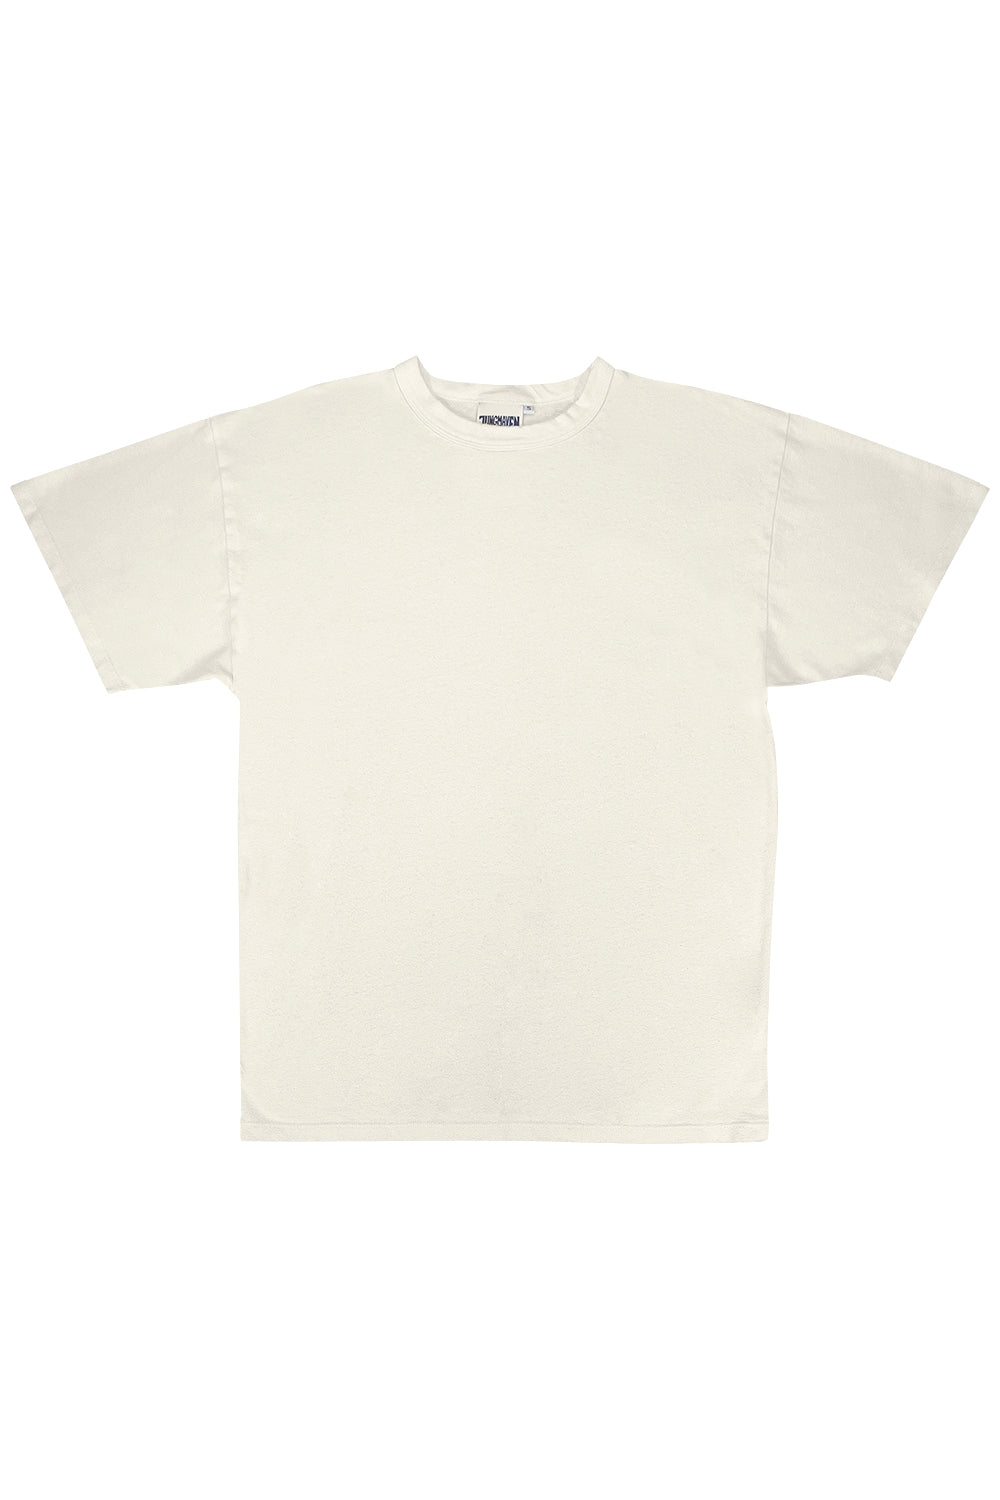 Vernon Oversized Tee | Jungmaven Hemp Clothing & Accessories / Color: Washed White